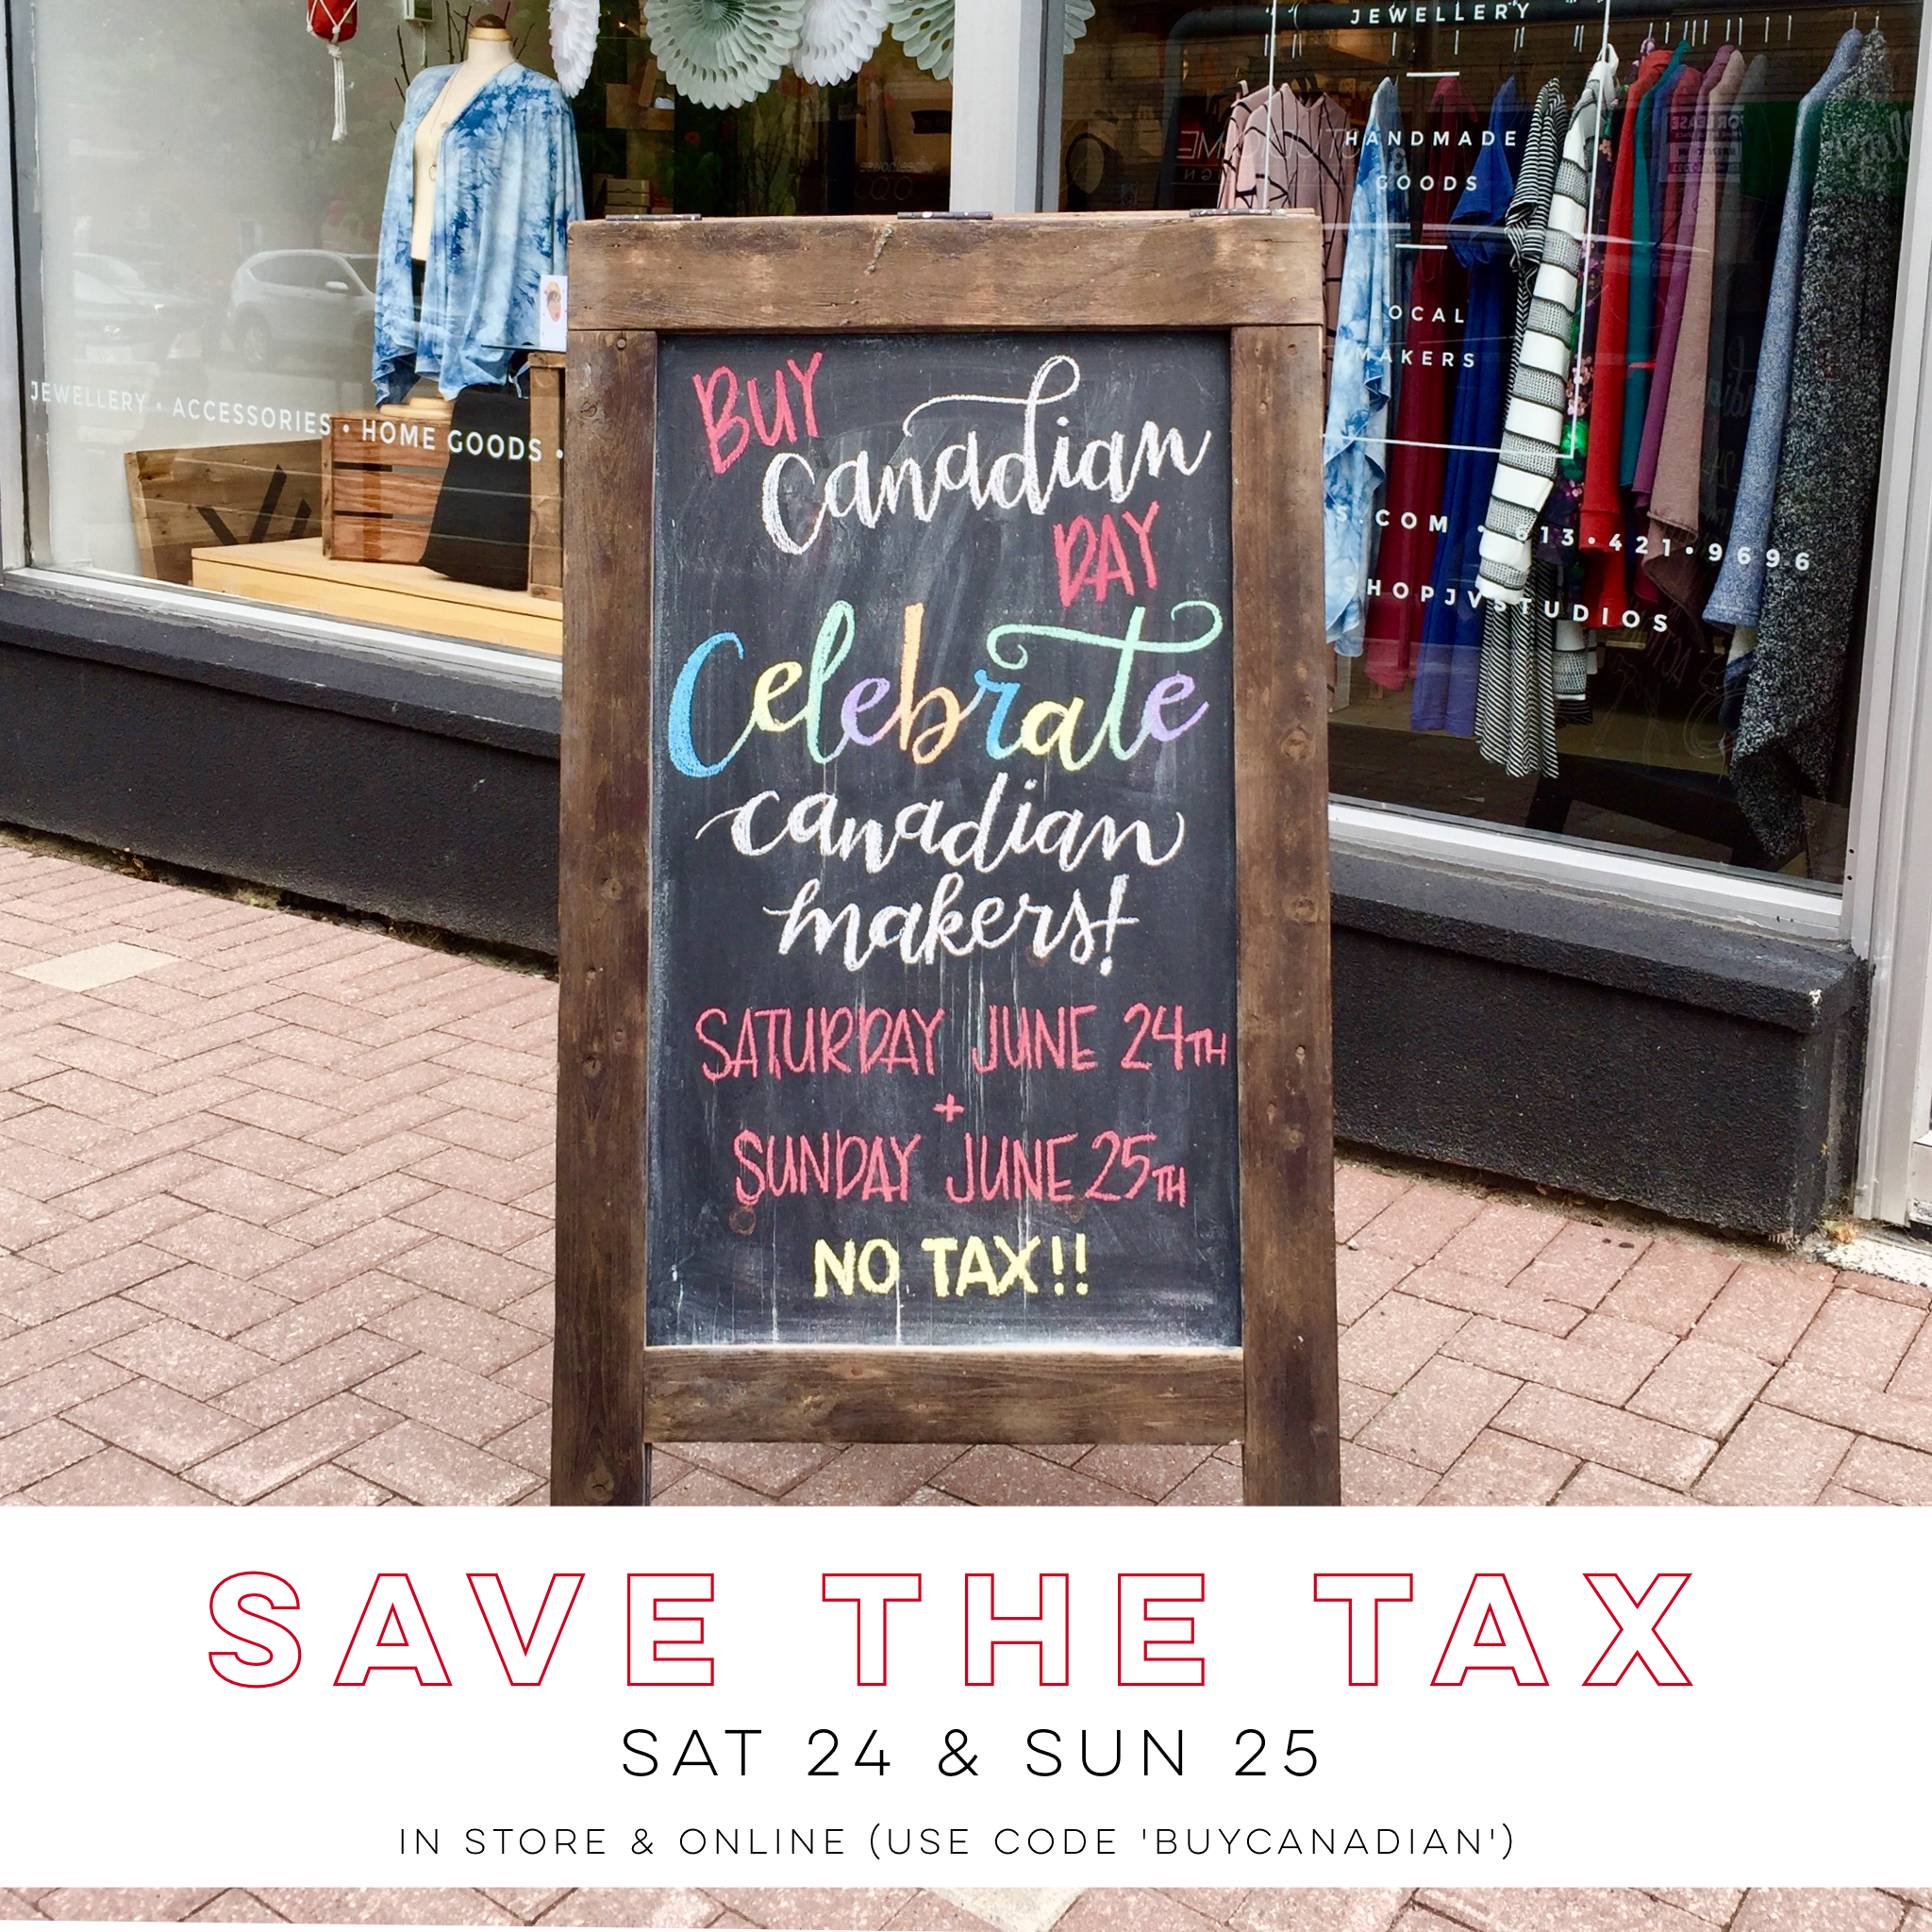 BUY CANADIAN & SAVE THE TAX!